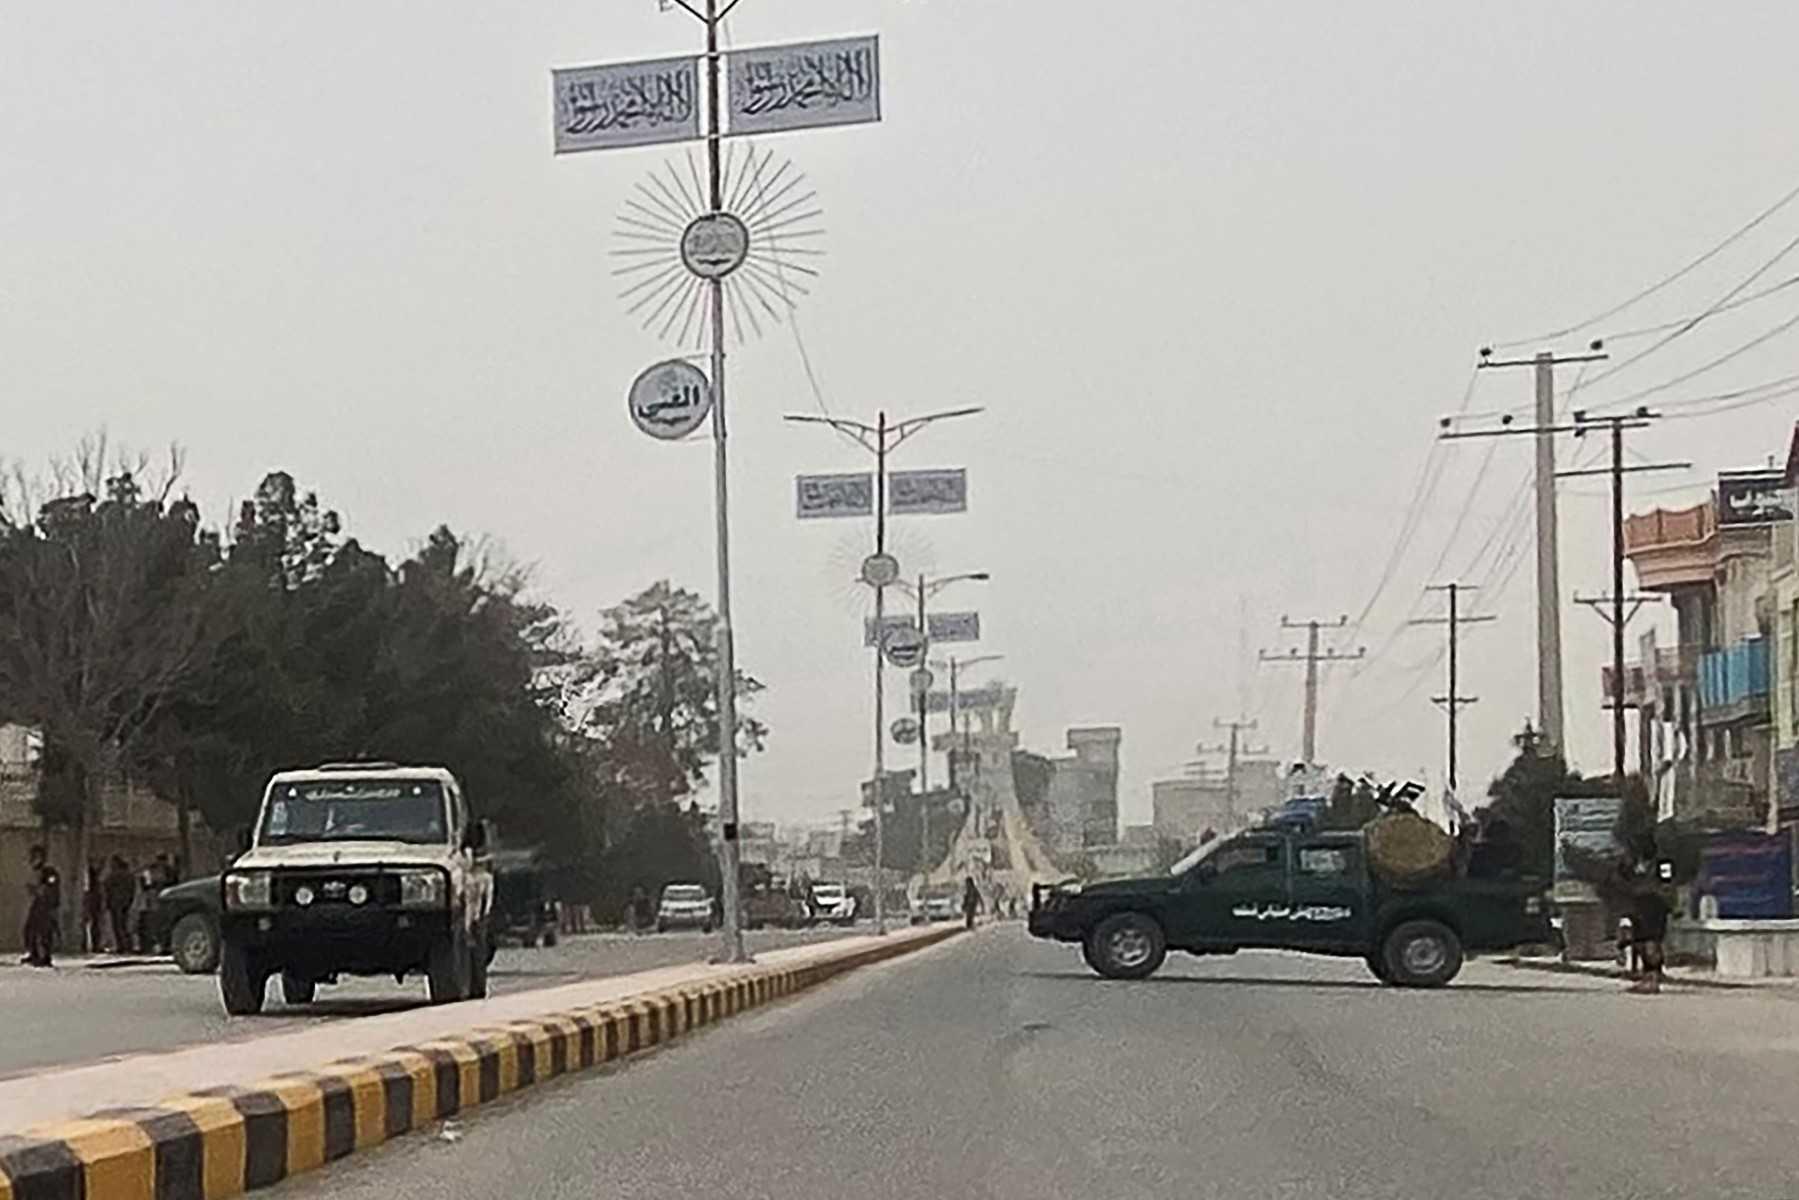 A Taliban security personnel (right) blocks a road in Mazar-i-Sharif, March 8, following a blast at the office of the Taliban governor of the Balkh province. Photo: AFP